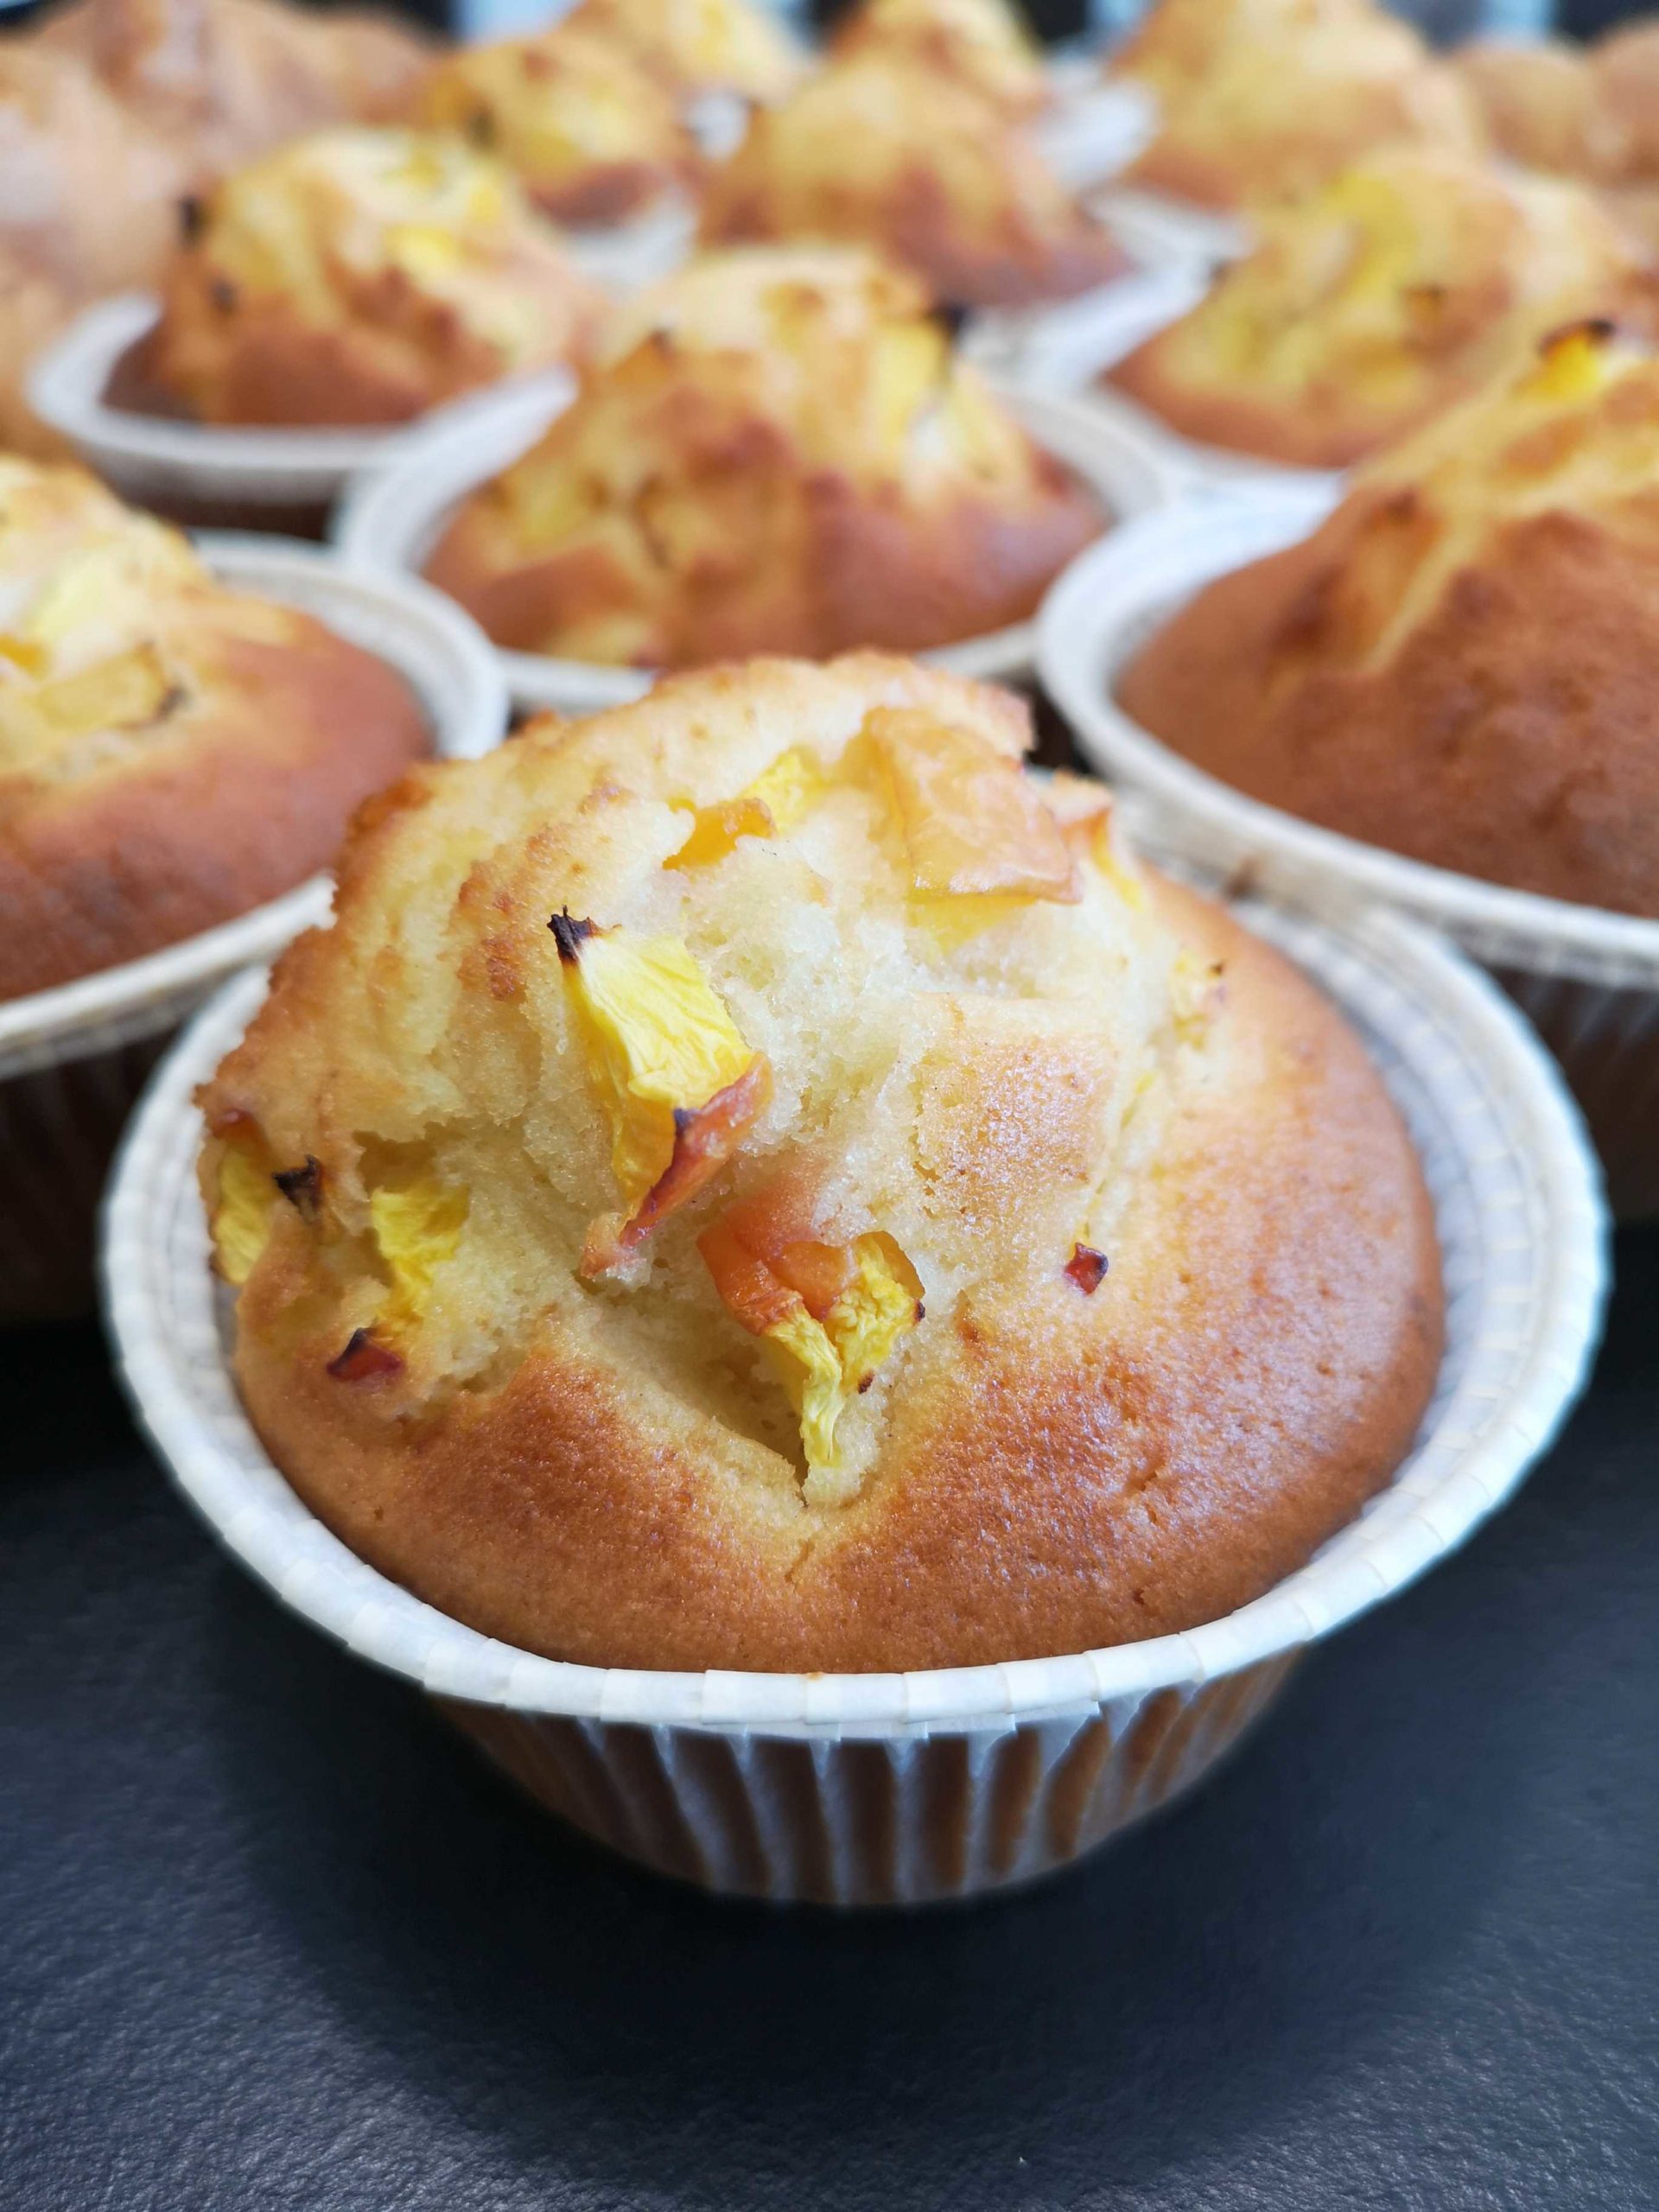 Peach muffins for you!